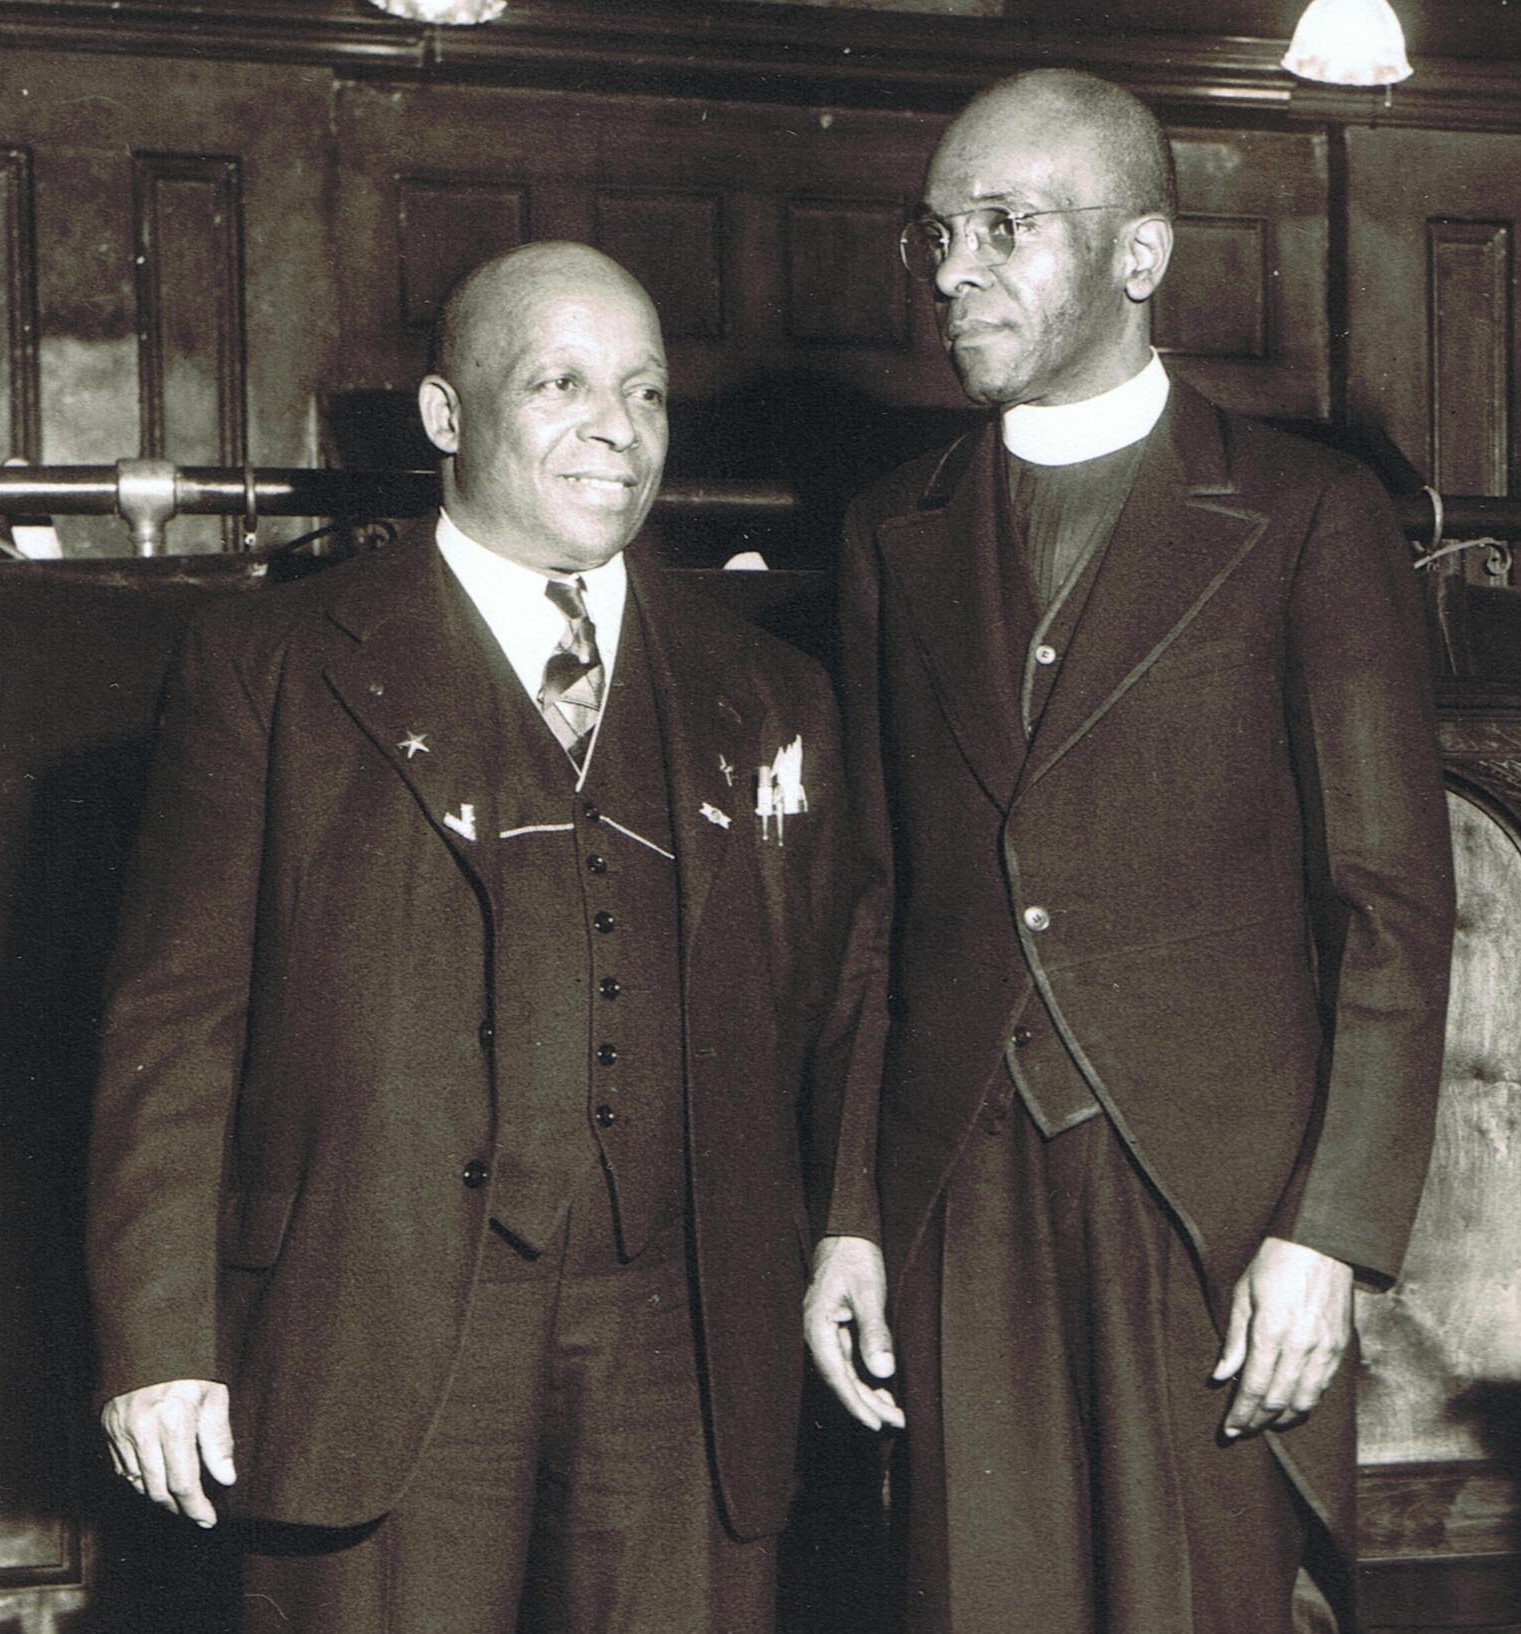 FATHER DIVINE and Bishop Simms